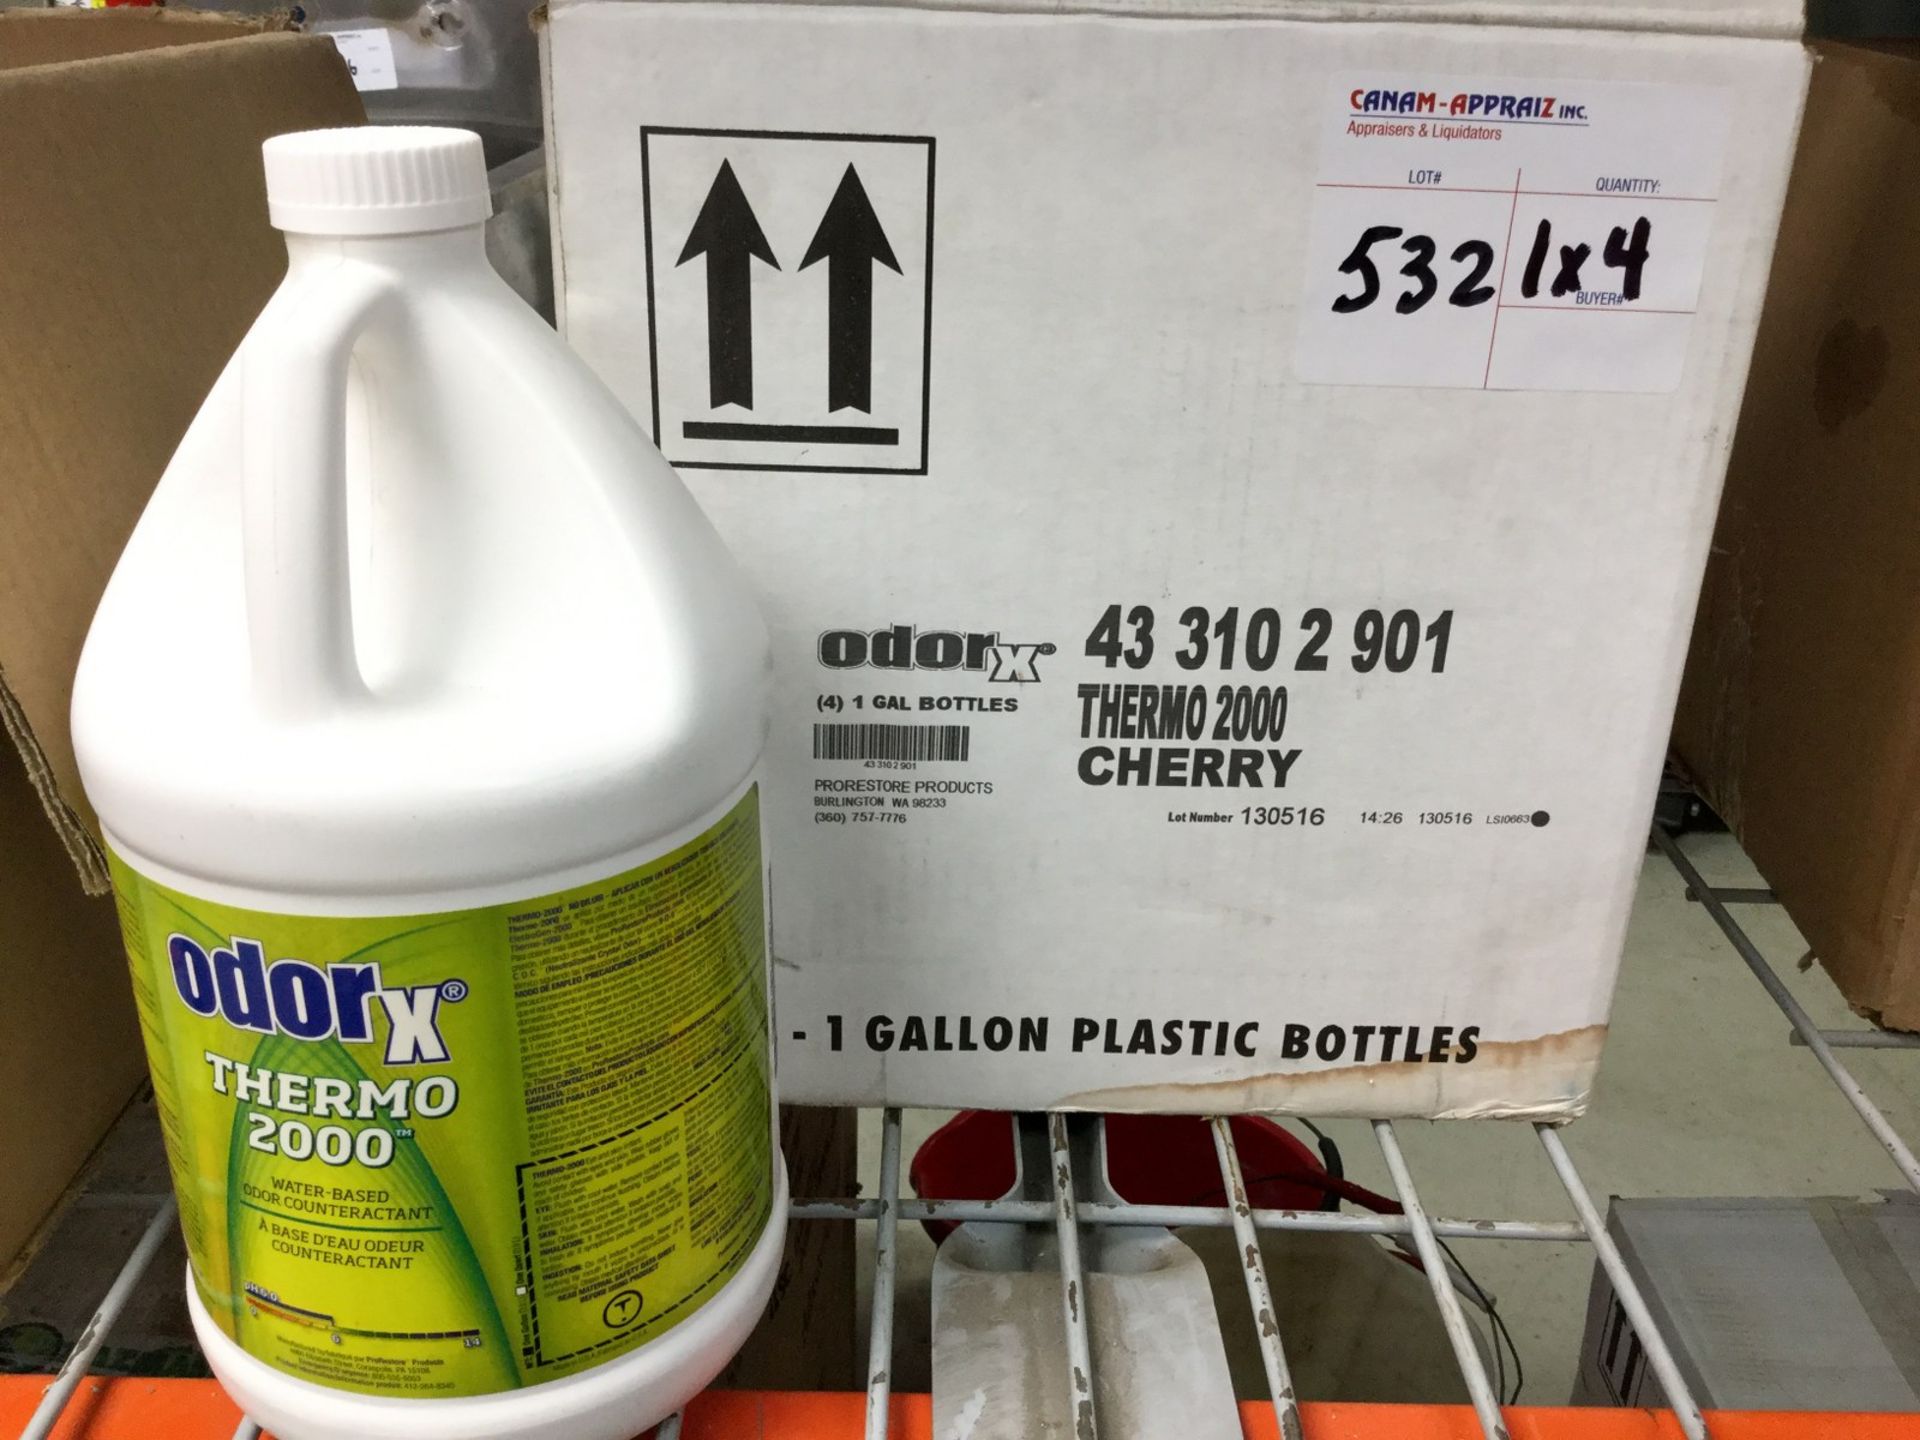 4 X ODORX - THERMO 2000 WATER BASED ODOR COUNTERACTANT 3.8L